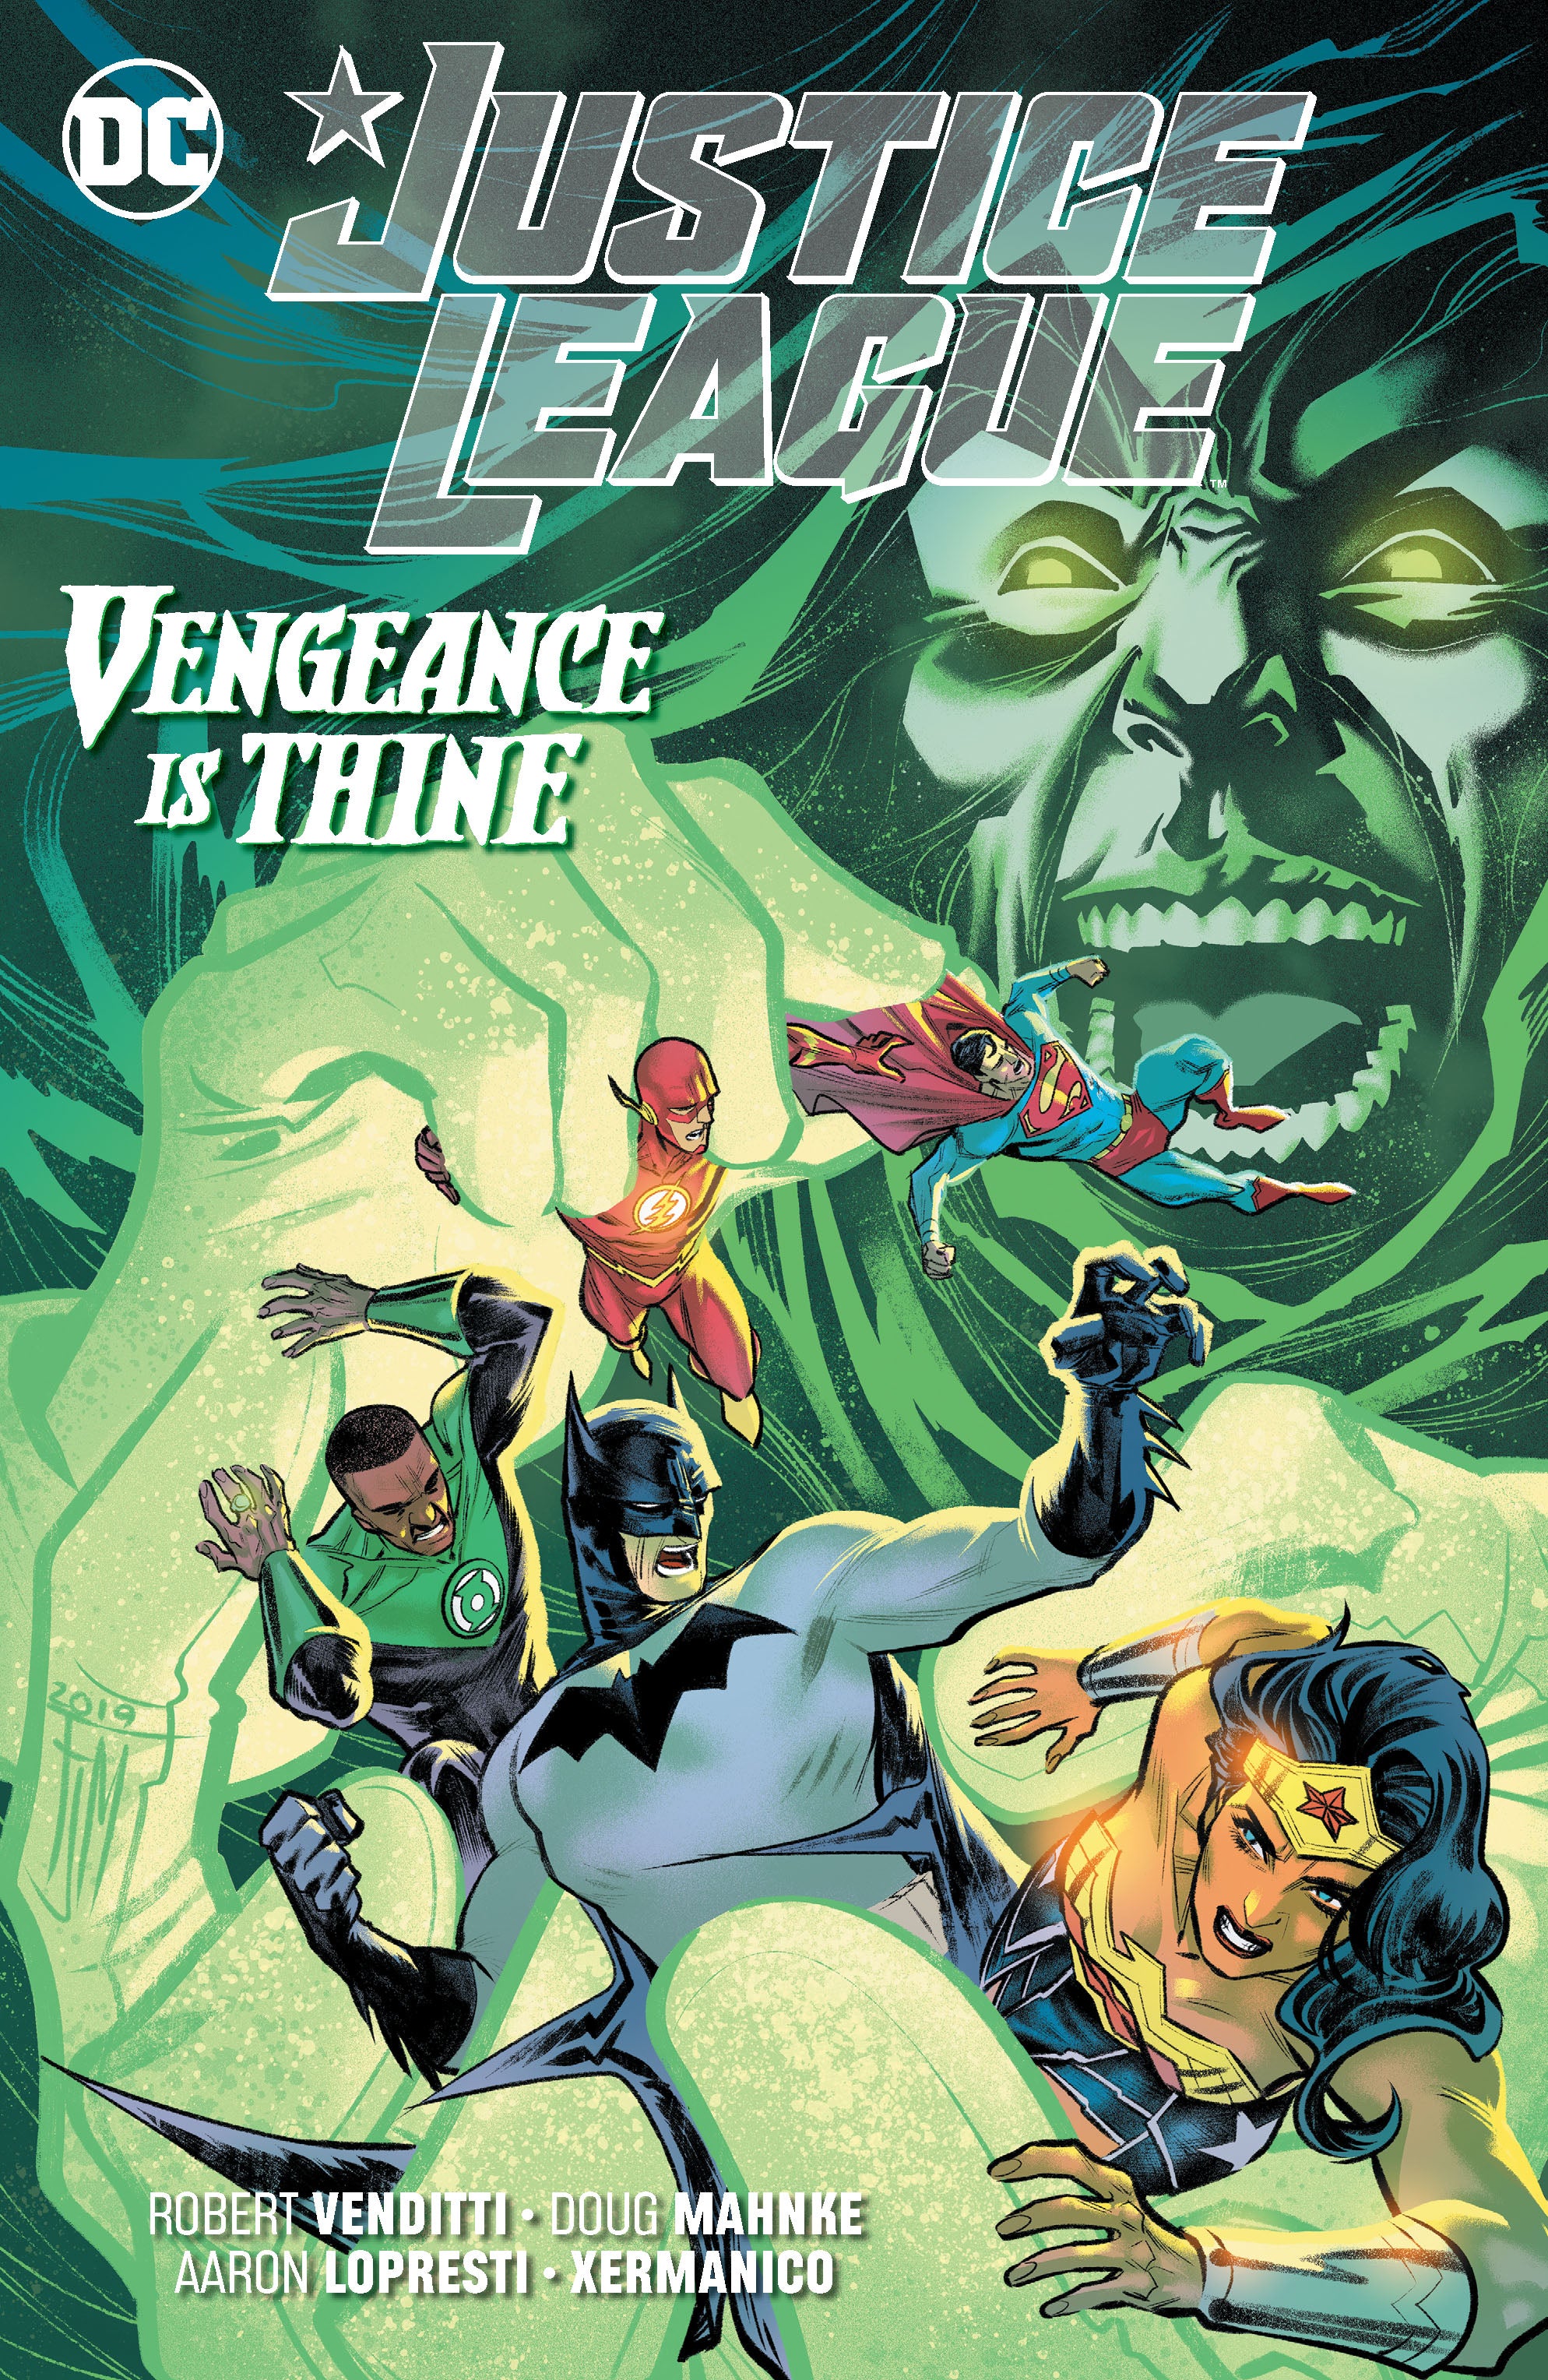 JUSTICE LEAGUE TRADE PAPERBACK VOL 06 VENGEANCE IS THINE